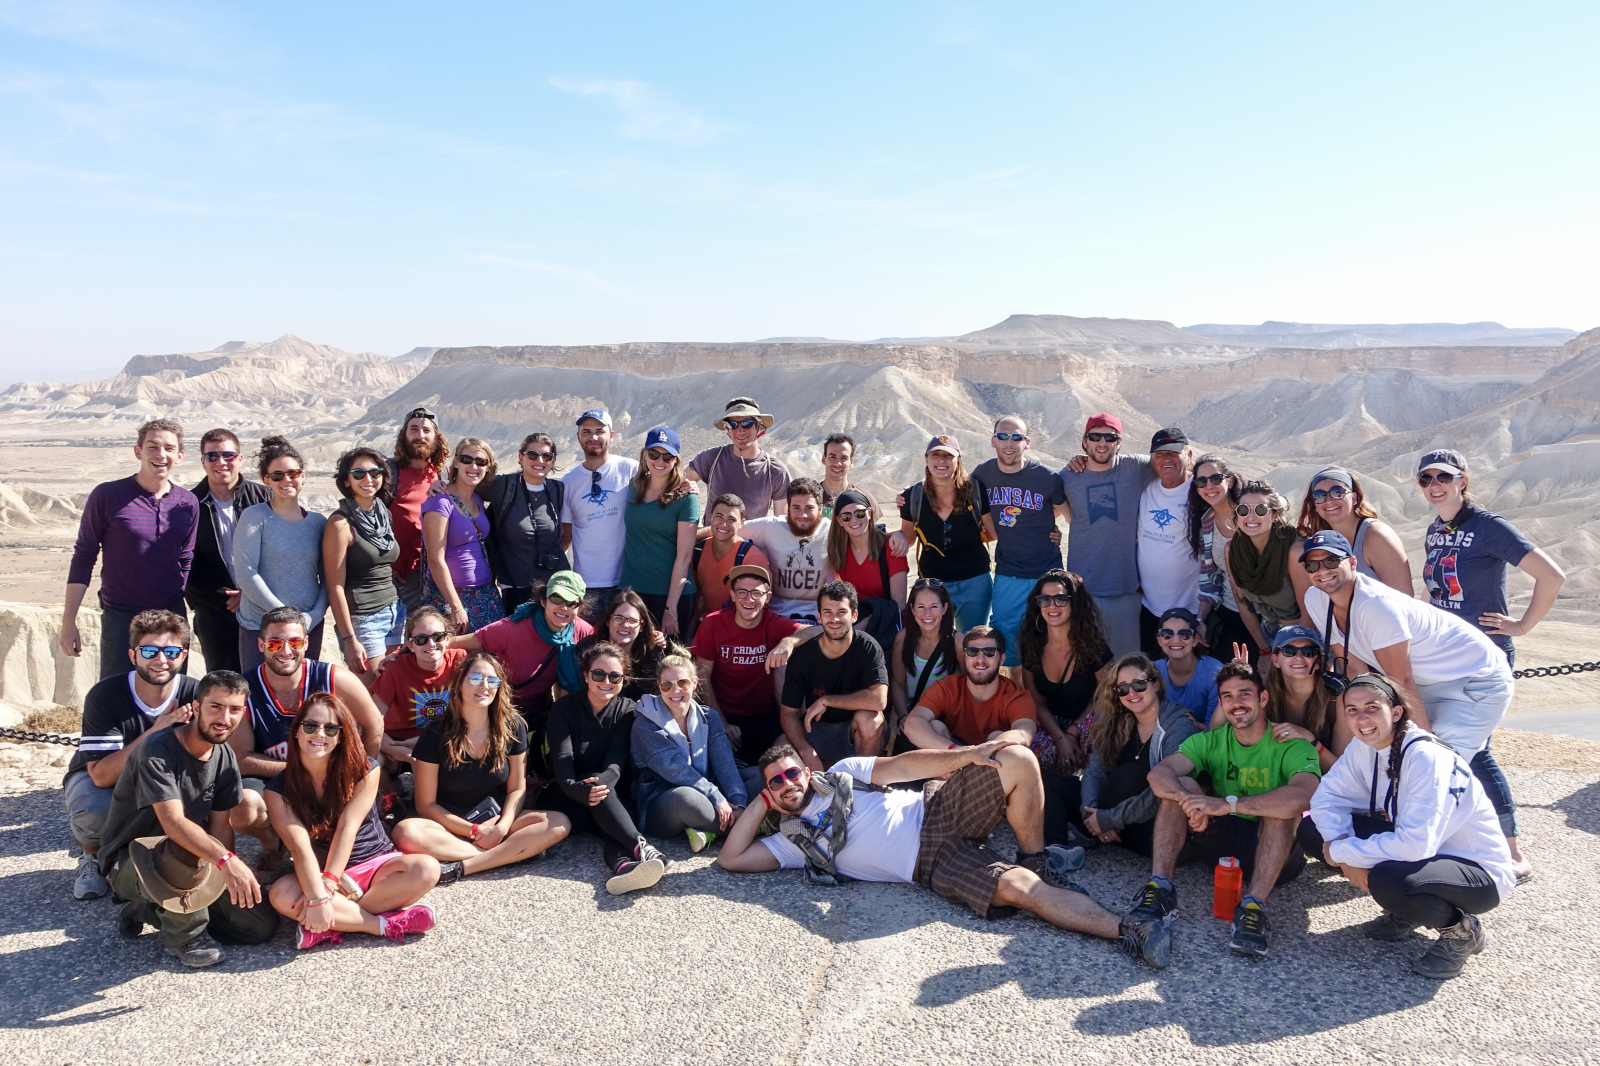 Group pic! Israel Outdoors Bus 288